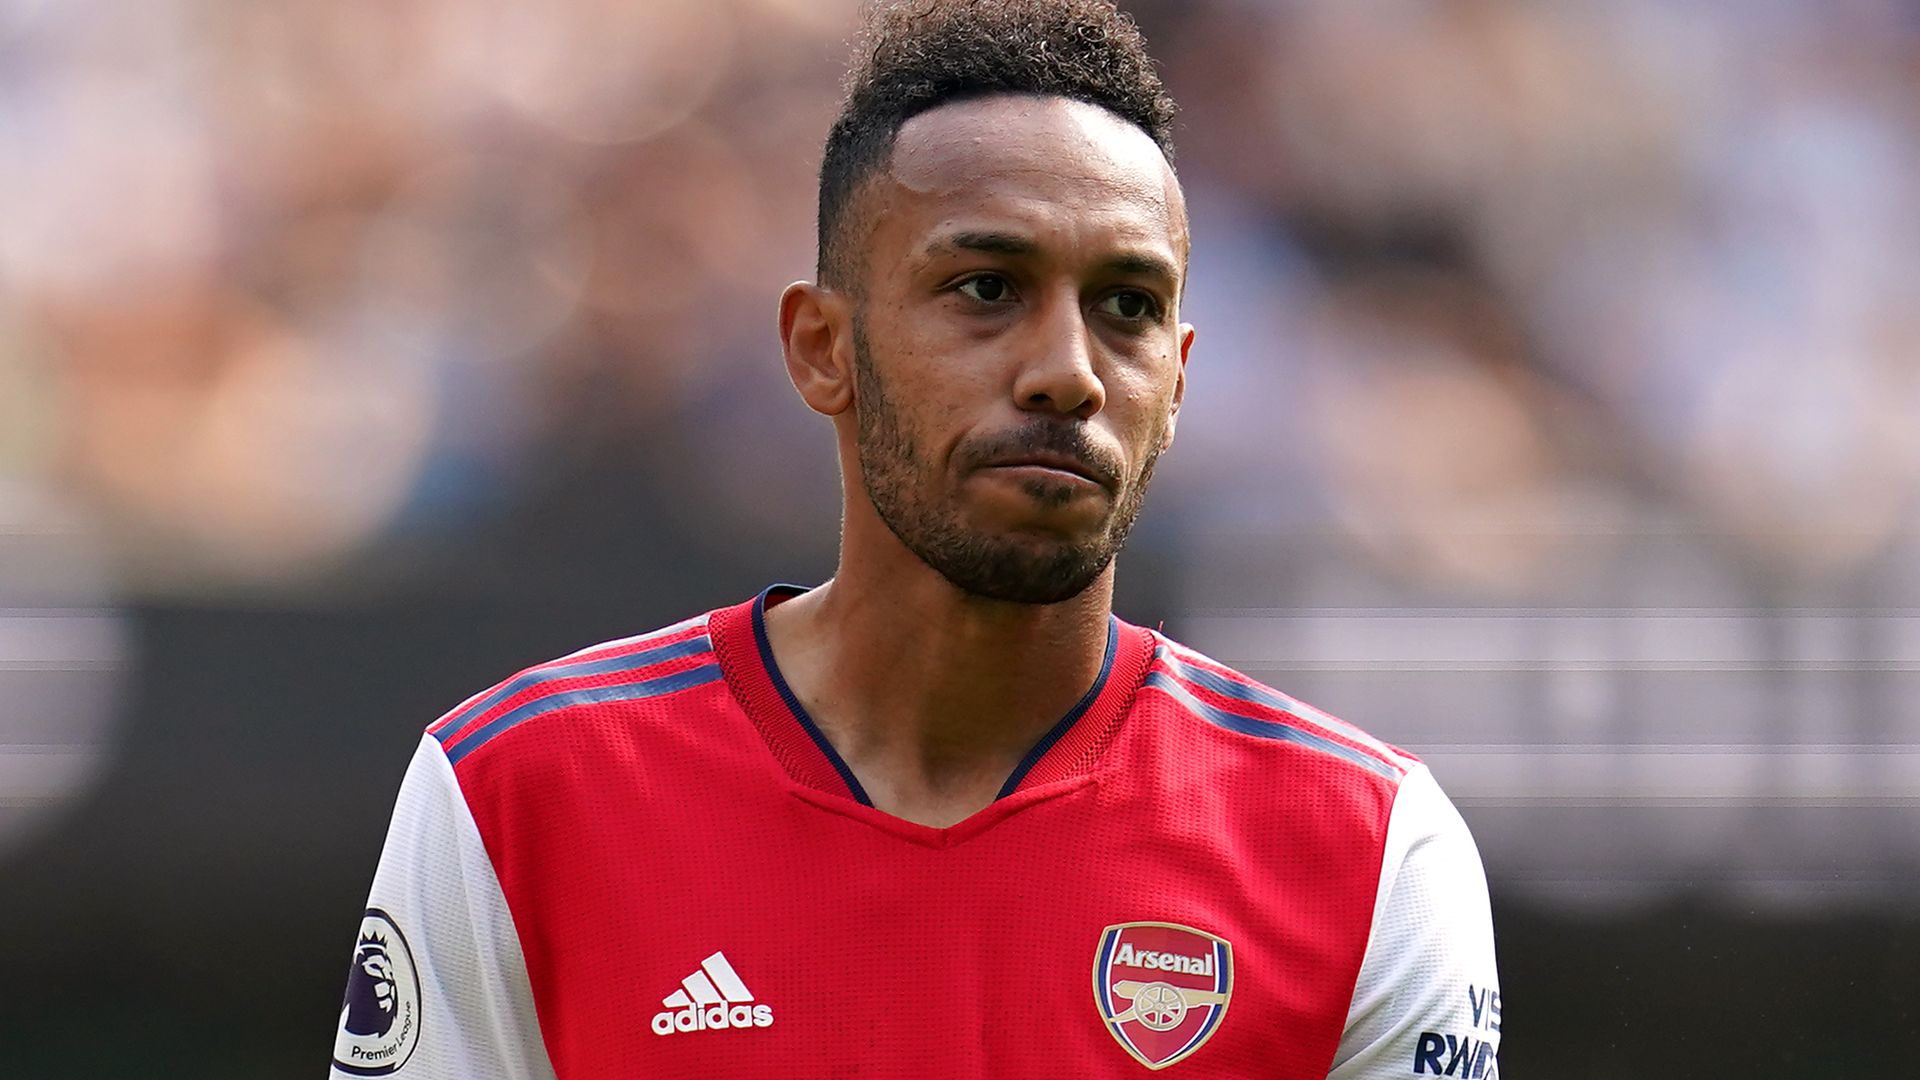 Arsenal in touch with Aubameyang after heart issue